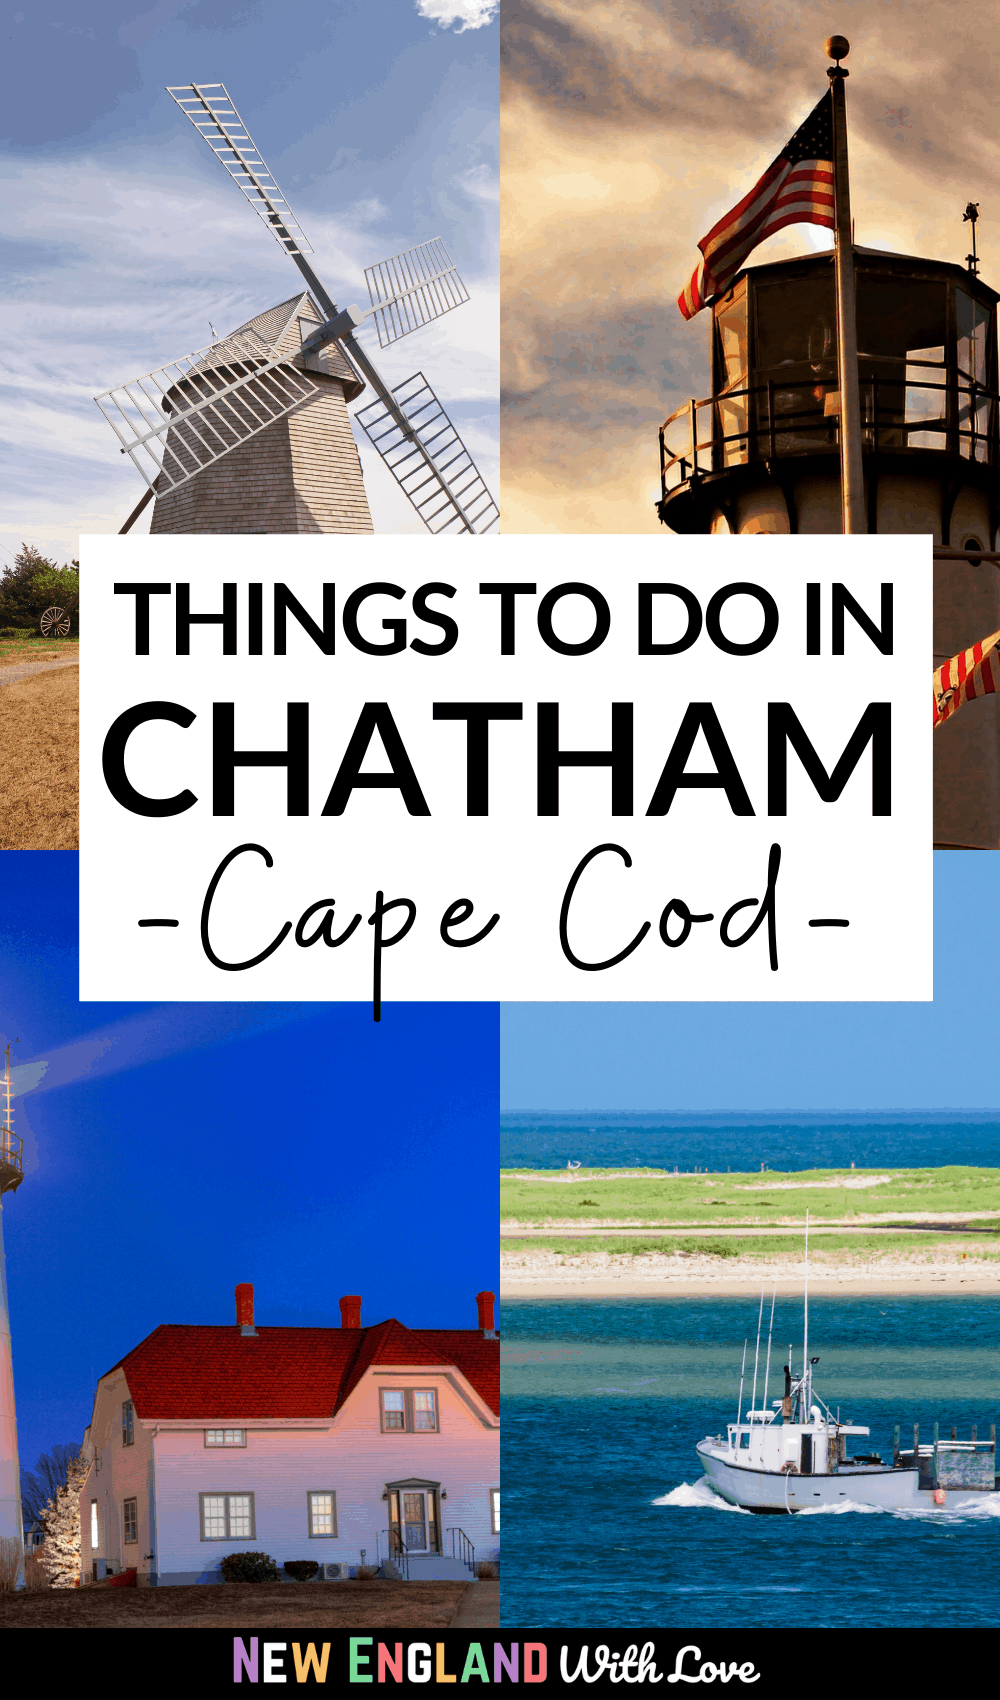 Pinterest graphic reading "THINGS TO DO IN CHATHAM Cape Cod"